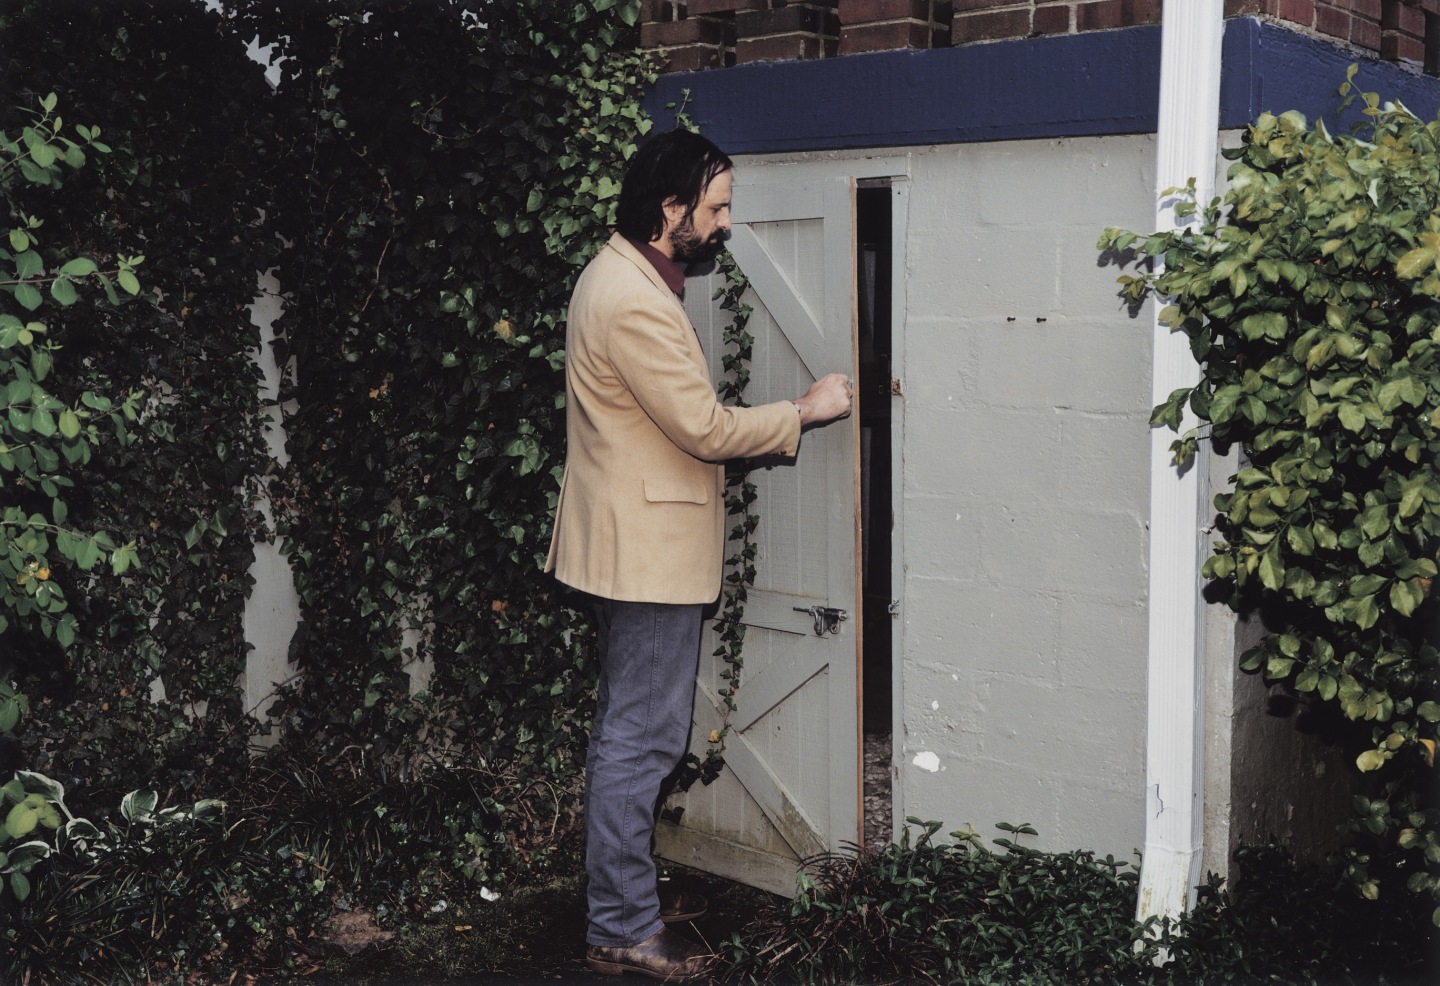 The FADER’s 2005 interview with David Berman